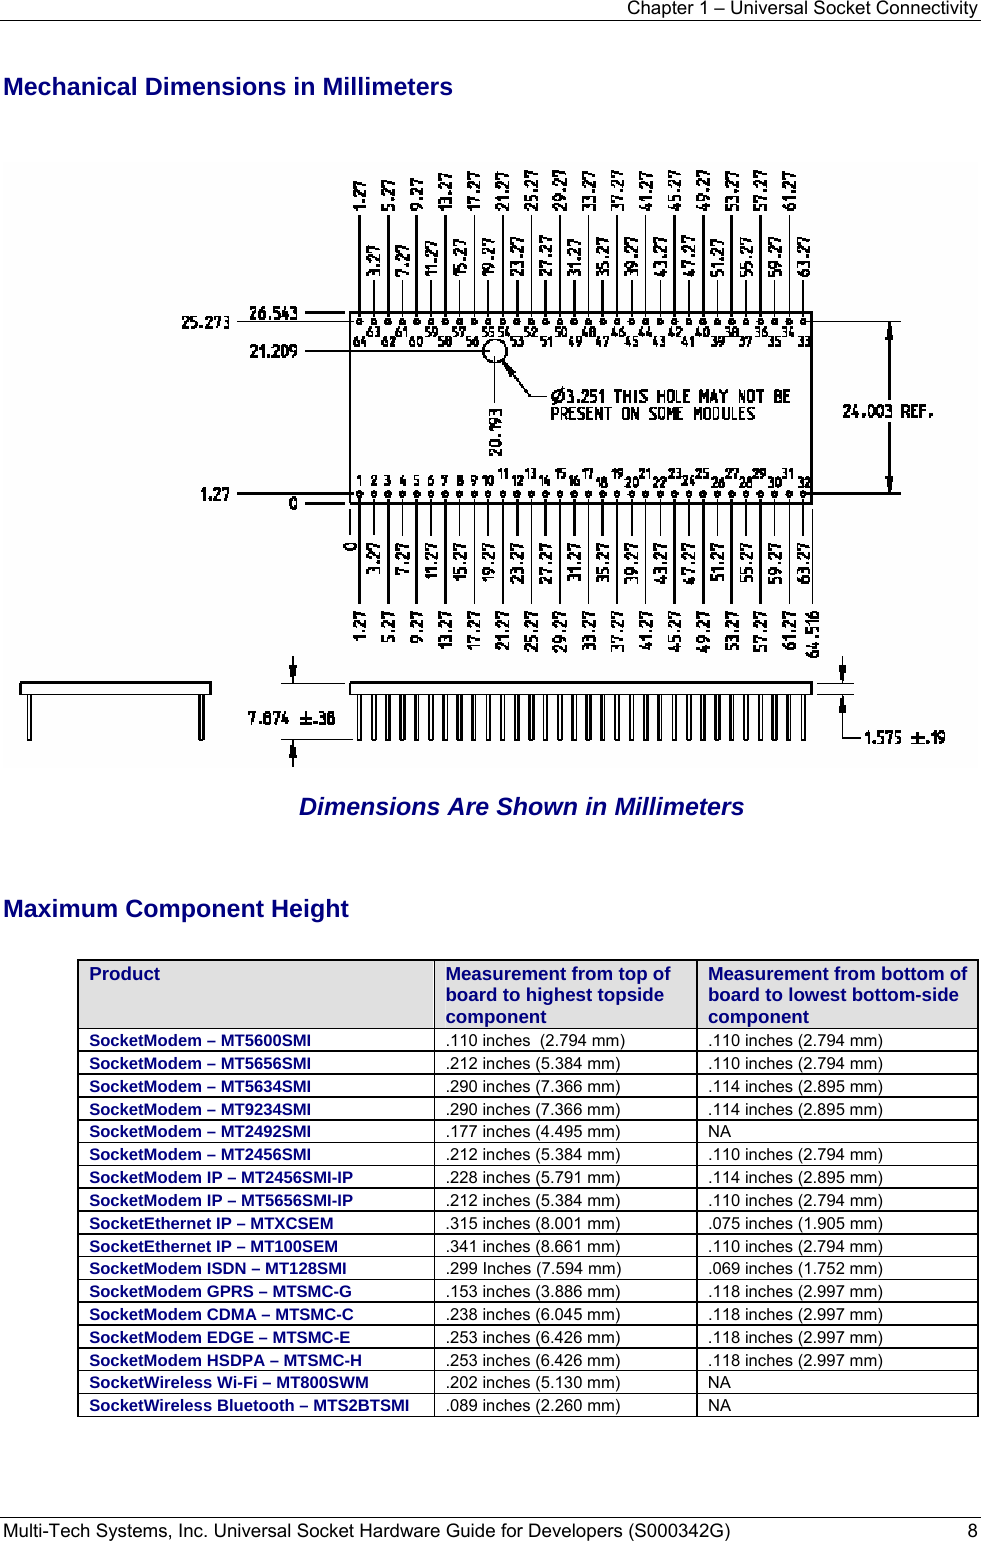 Chapter 1 – Universal Socket Connectivity Multi-Tech Systems, Inc. Universal Socket Hardware Guide for Developers (S000342G)  8  Mechanical Dimensions in Millimeters              Dimensions Are Shown in Millimeters   Maximum Component Height  Product  Measurement from top of board to highest topside component Measurement from bottom of board to lowest bottom-side component SocketModem – MT5600SMI .110 inches  (2.794 mm) .110 inches (2.794 mm) SocketModem – MT5656SMI .212 inches (5.384 mm) .110 inches (2.794 mm) SocketModem – MT5634SMI  .290 inches (7.366 mm) .114 inches (2.895 mm) SocketModem – MT9234SMI  .290 inches (7.366 mm)  .114 inches (2.895 mm) SocketModem – MT2492SMI  .177 inches (4.495 mm) NA SocketModem – MT2456SMI  .212 inches (5.384 mm) .110 inches (2.794 mm) SocketModem IP – MT2456SMI-IP .228 inches (5.791 mm) .114 inches (2.895 mm) SocketModem IP – MT5656SMI-IP .212 inches (5.384 mm) .110 inches (2.794 mm) SocketEthernet IP – MTXCSEM .315 inches (8.001 mm) .075 inches (1.905 mm) SocketEthernet IP – MT100SEM  .341 inches (8.661 mm)  .110 inches (2.794 mm) SocketModem ISDN – MT128SMI  .299 Inches (7.594 mm)  .069 inches (1.752 mm) SocketModem GPRS – MTSMC-G .153 inches (3.886 mm) .118 inches (2.997 mm) SocketModem CDMA – MTSMC-C .238 inches (6.045 mm)  .118 inches (2.997 mm) SocketModem EDGE – MTSMC-E  .253 inches (6.426 mm)  .118 inches (2.997 mm) SocketModem HSDPA – MTSMC-H  .253 inches (6.426 mm)  .118 inches (2.997 mm) SocketWireless Wi-Fi – MT800SWM  .202 inches (5.130 mm)  NA SocketWireless Bluetooth – MTS2BTSMI .089 inches (2.260 mm) NA   